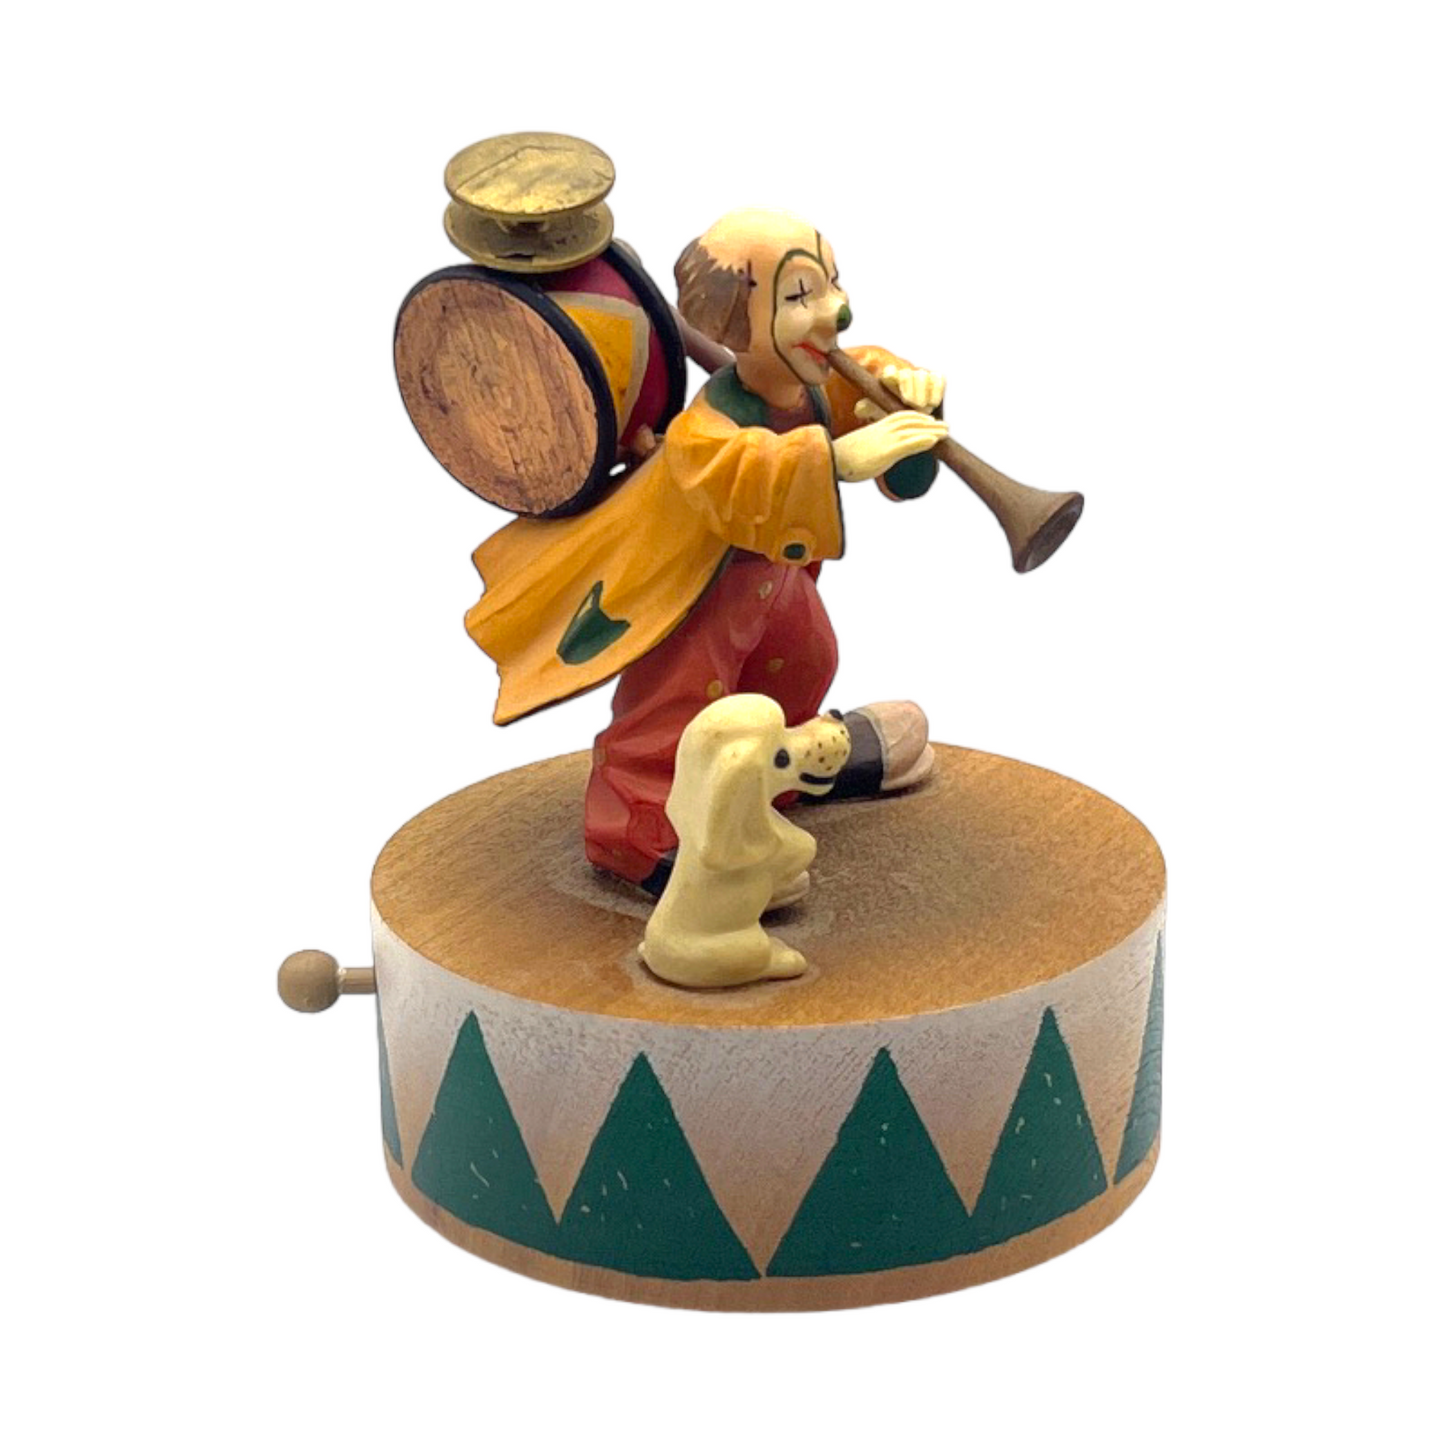 ANRI Woodcarving - Music Box - Send in The Clowns - 5"